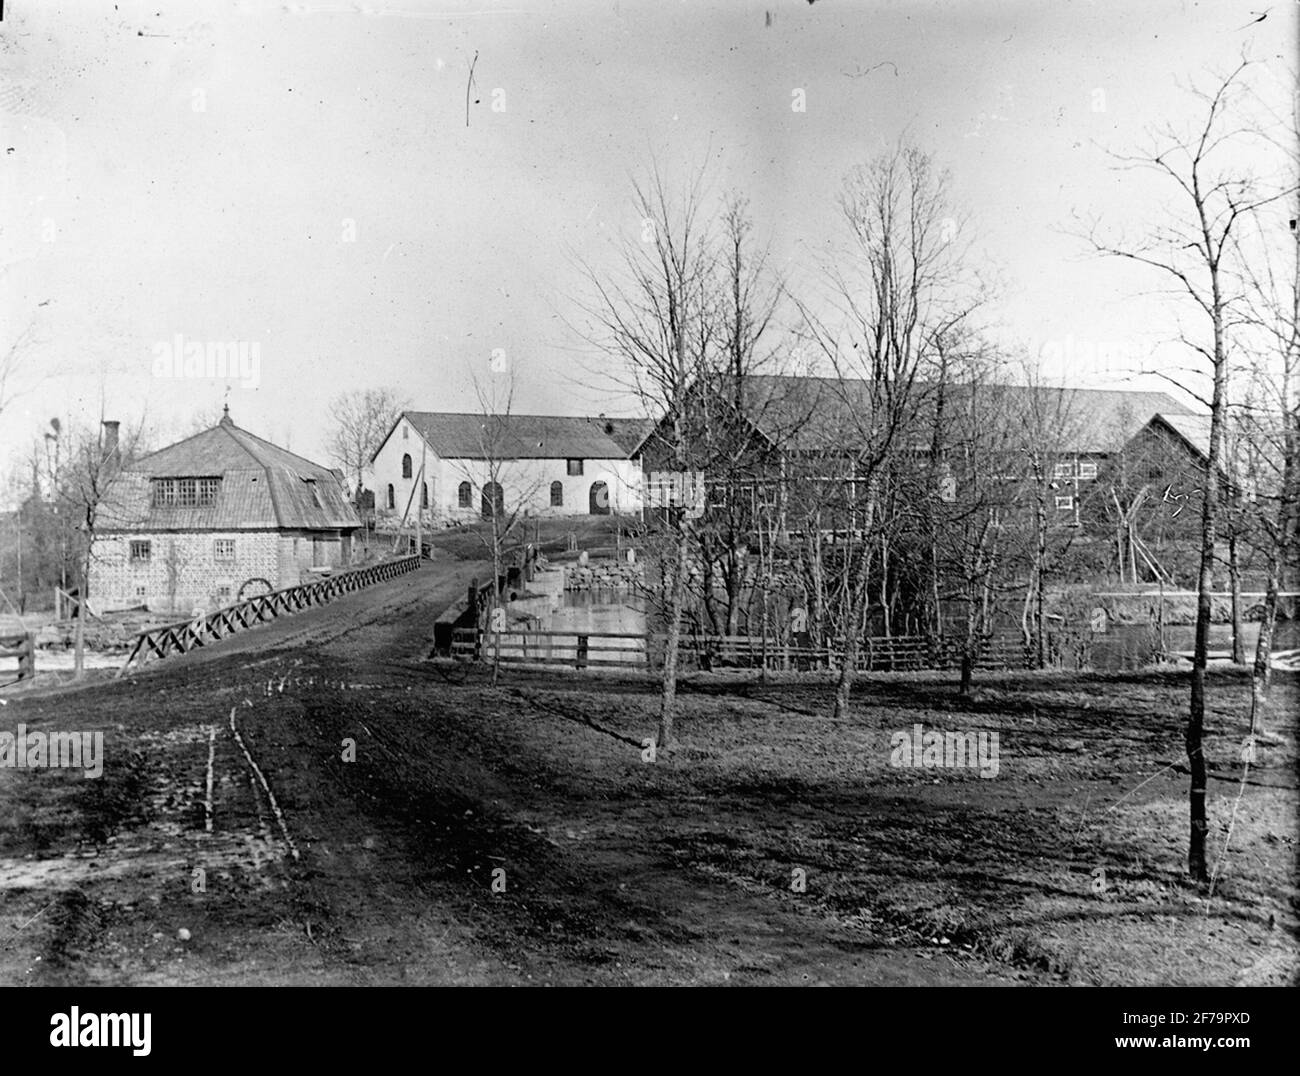 Wesslands mills about 1909. The smithy was on the left of the bridge. The mill in its original condition, the roof possibly remodeled in the 1890s. The blast furnace was on the far side of the bridge to >> right, where on the picture a quay built. The place replenished and partly built with the log, which was built around 1904.Det White House in the fund is an old carbon house of slag in clay, since the 1870s furnished to horse stables, to which it was still used. The building far right is a former rost oven. Stock Photo